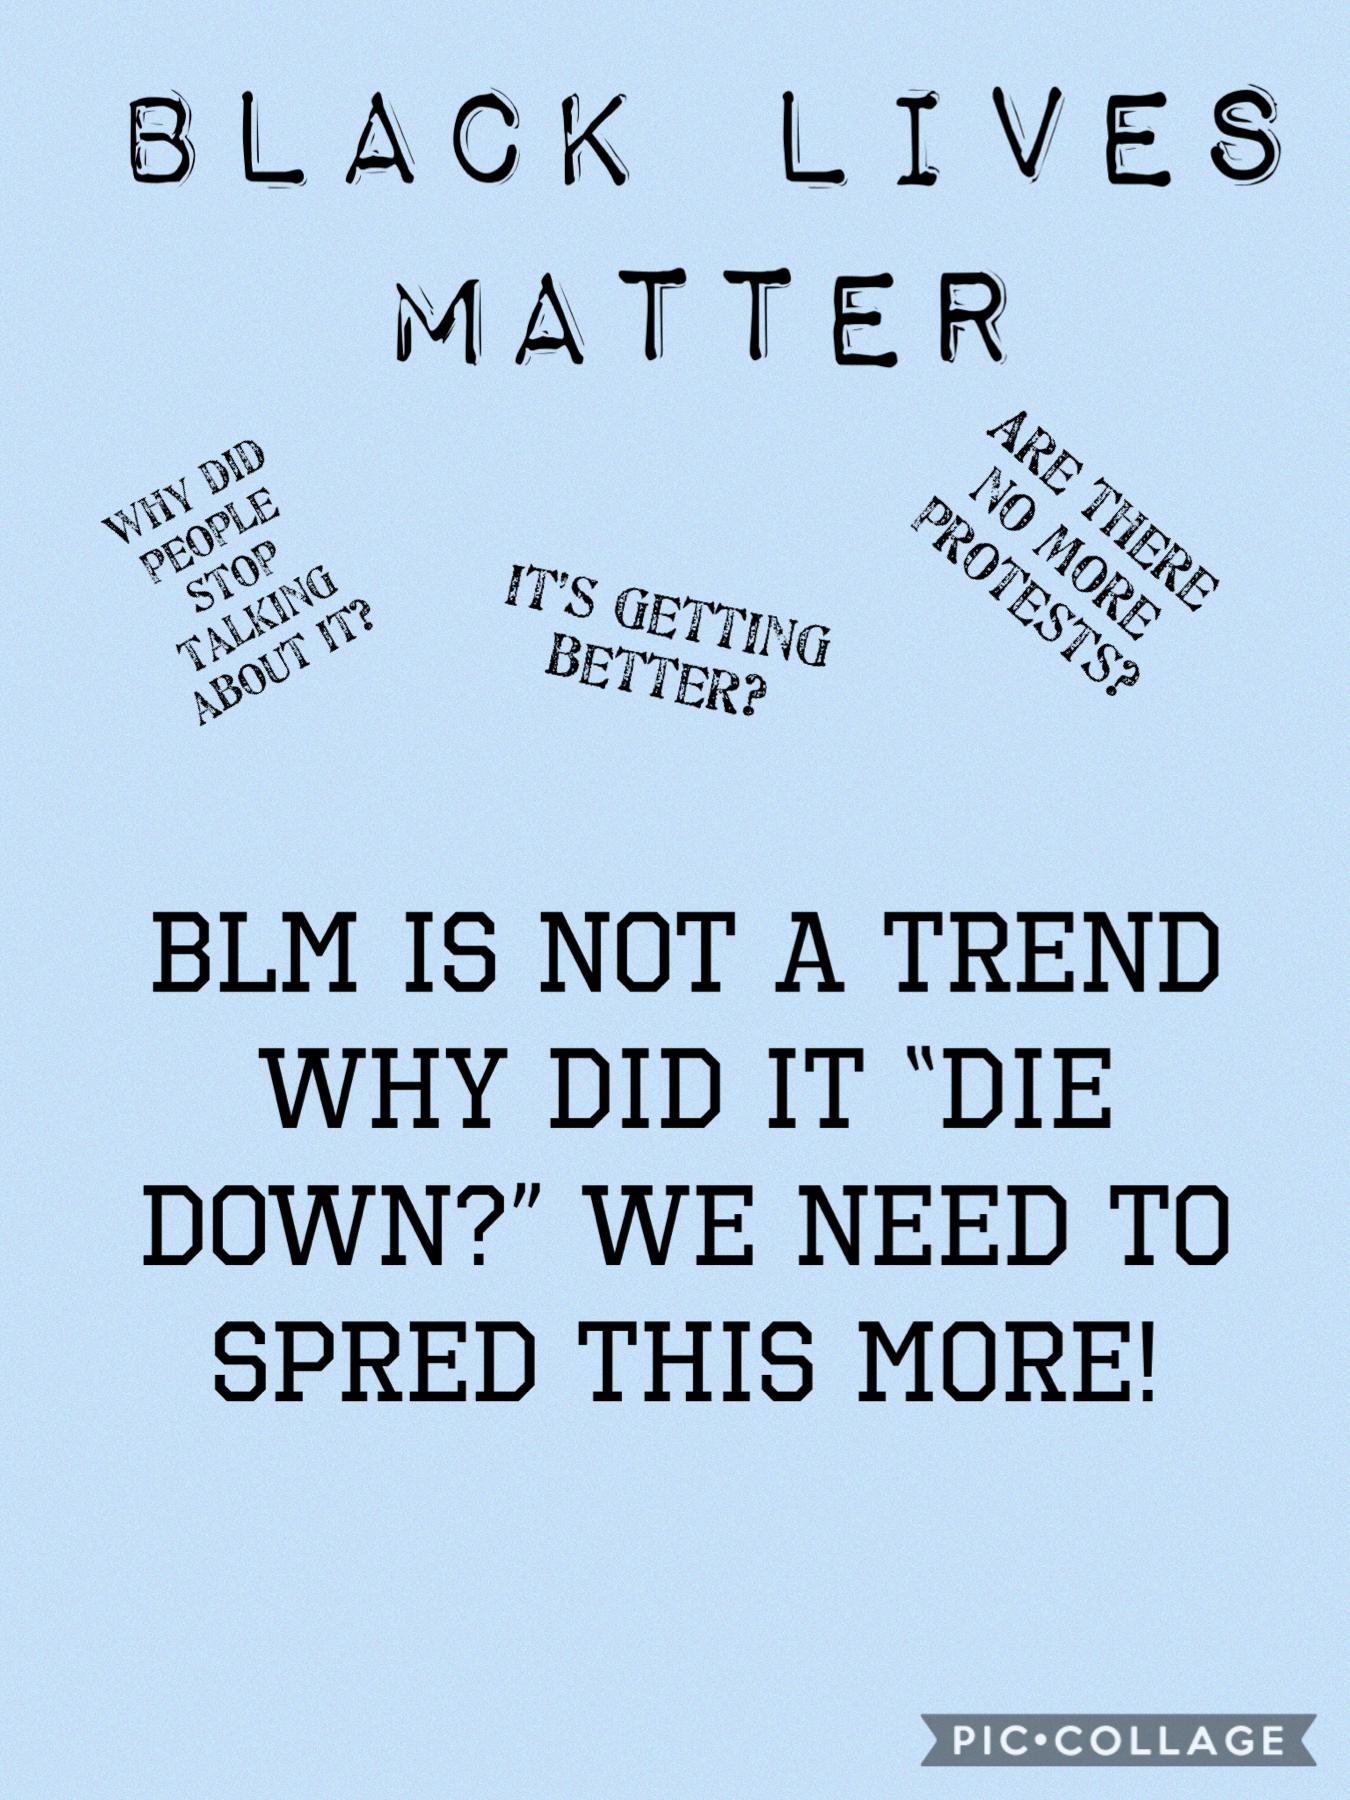 BLM! REMIX THIS POST TO SPREAD BLM!